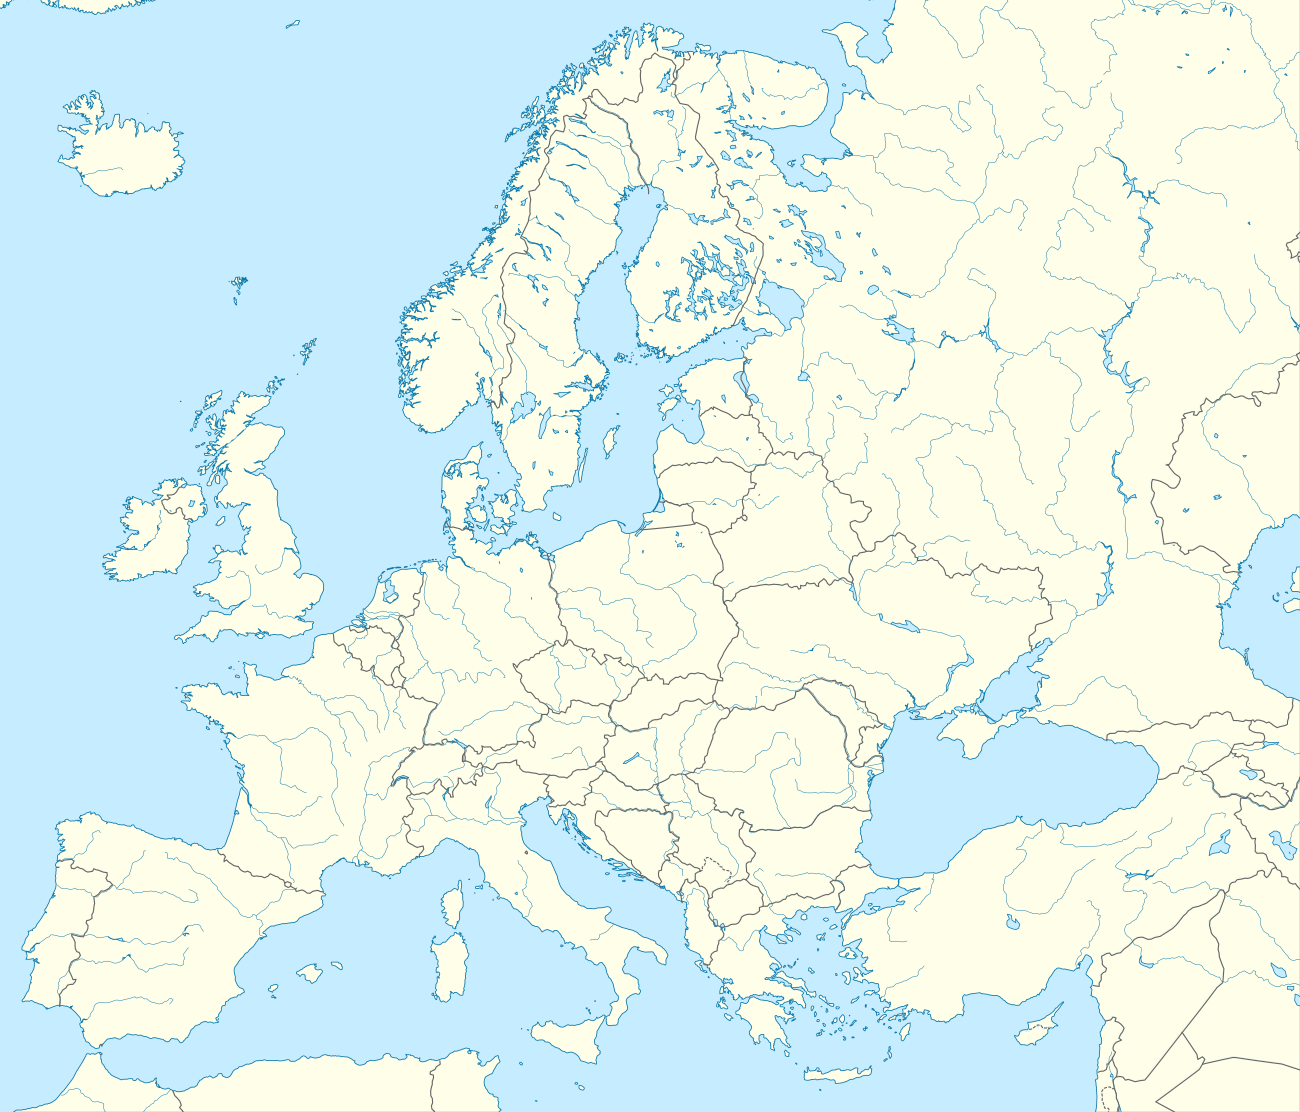 Europe laea location map with borders.svg